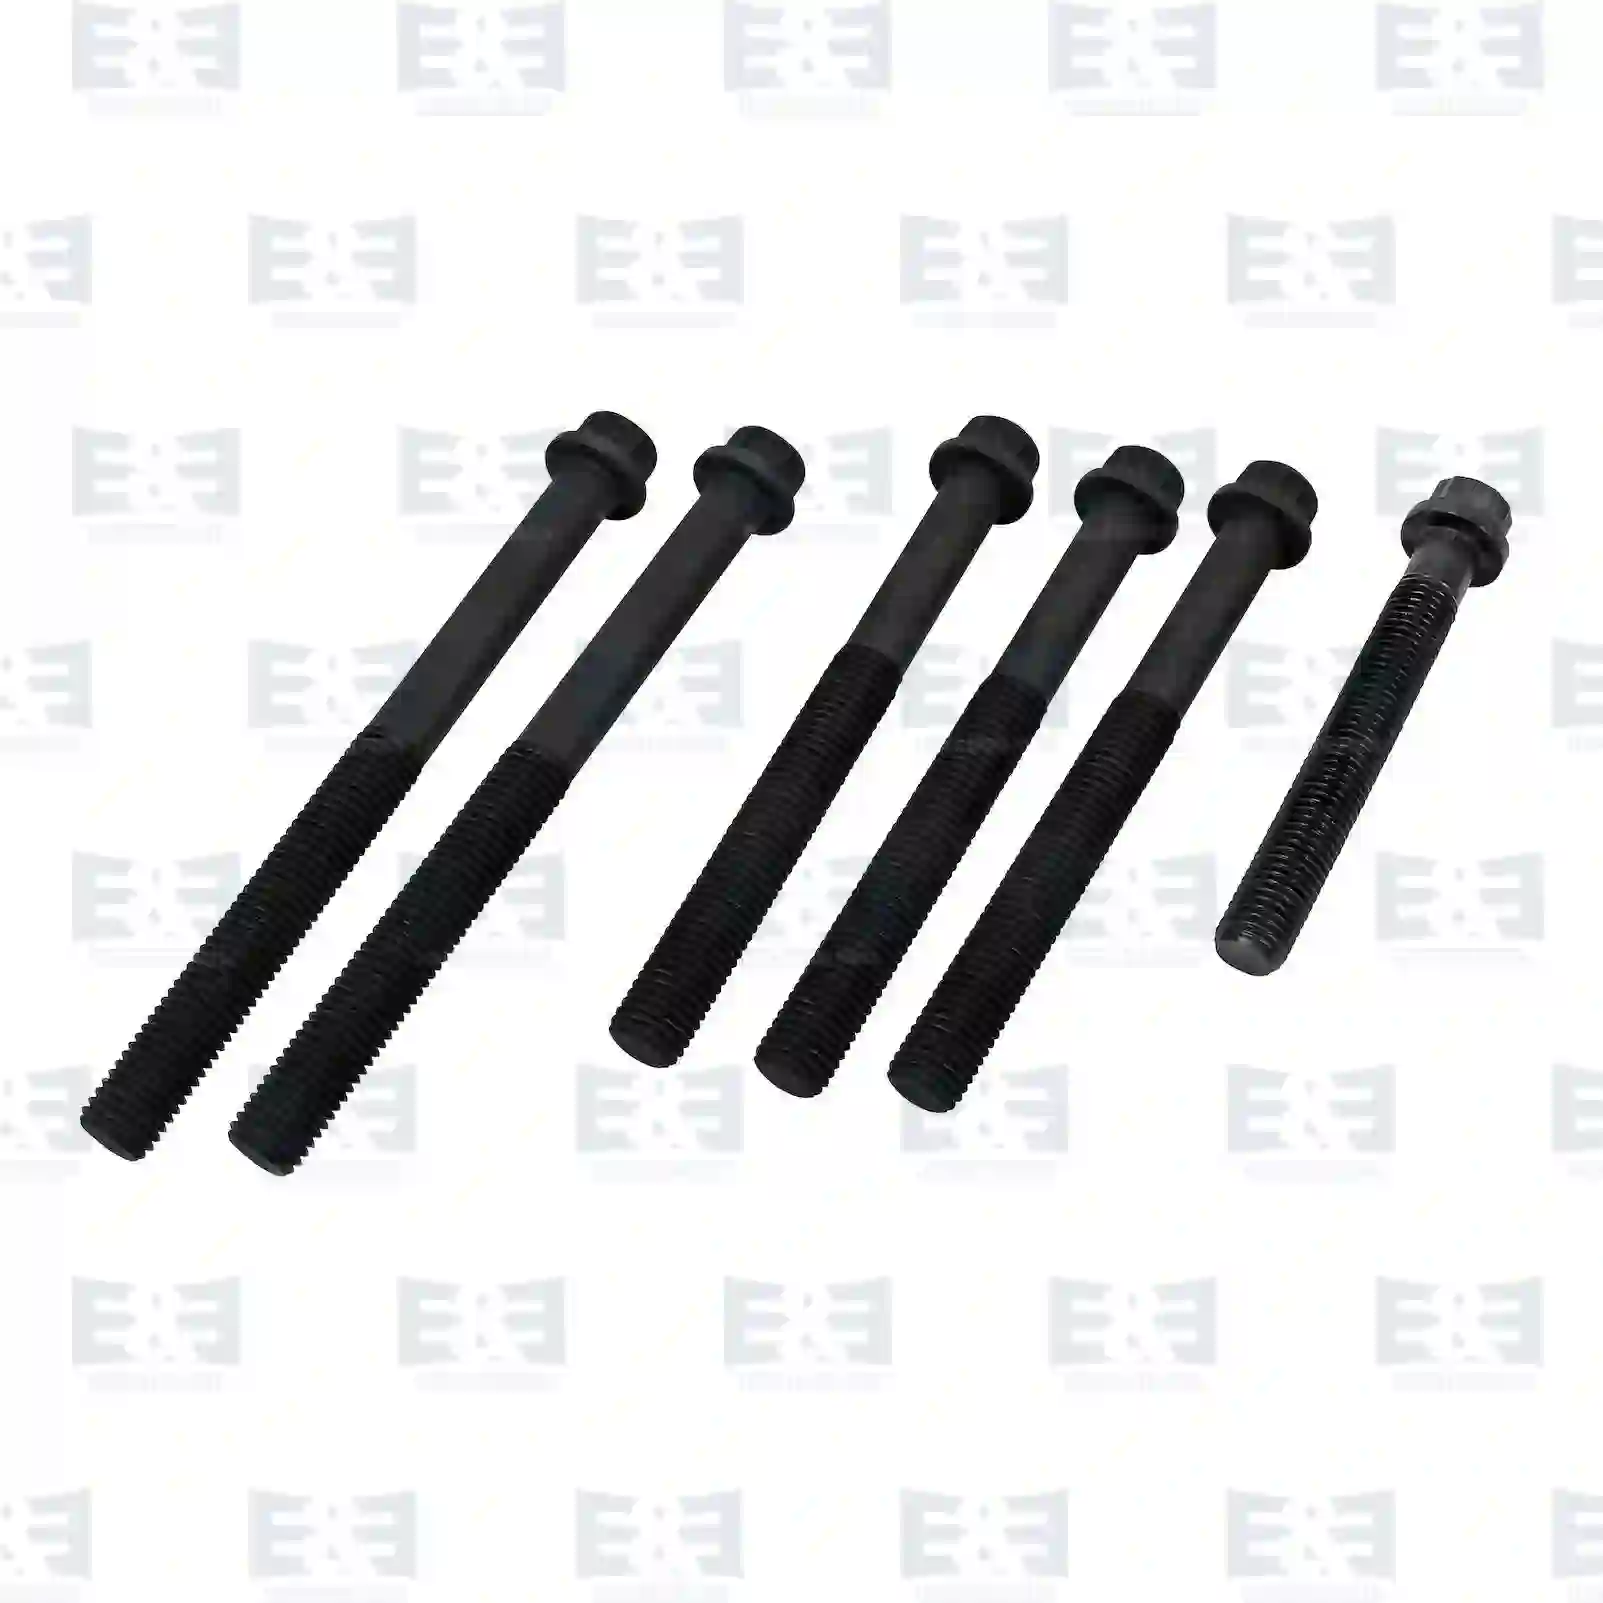  Cylinder head screw kit || E&E Truck Spare Parts | Truck Spare Parts, Auotomotive Spare Parts